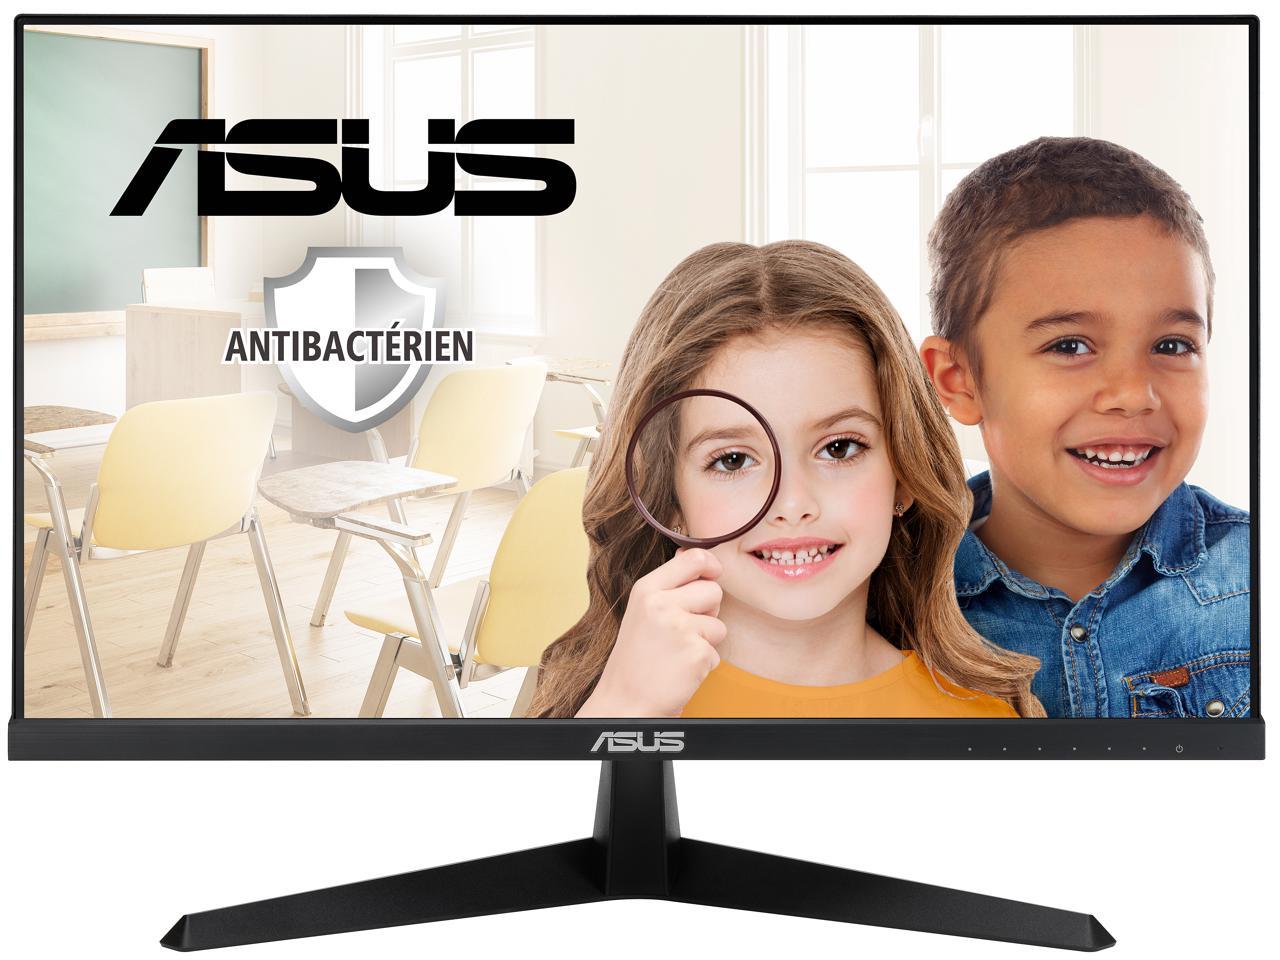 ASUS MNTR ASUS 23.8" 75HZ IPS VY249HE R